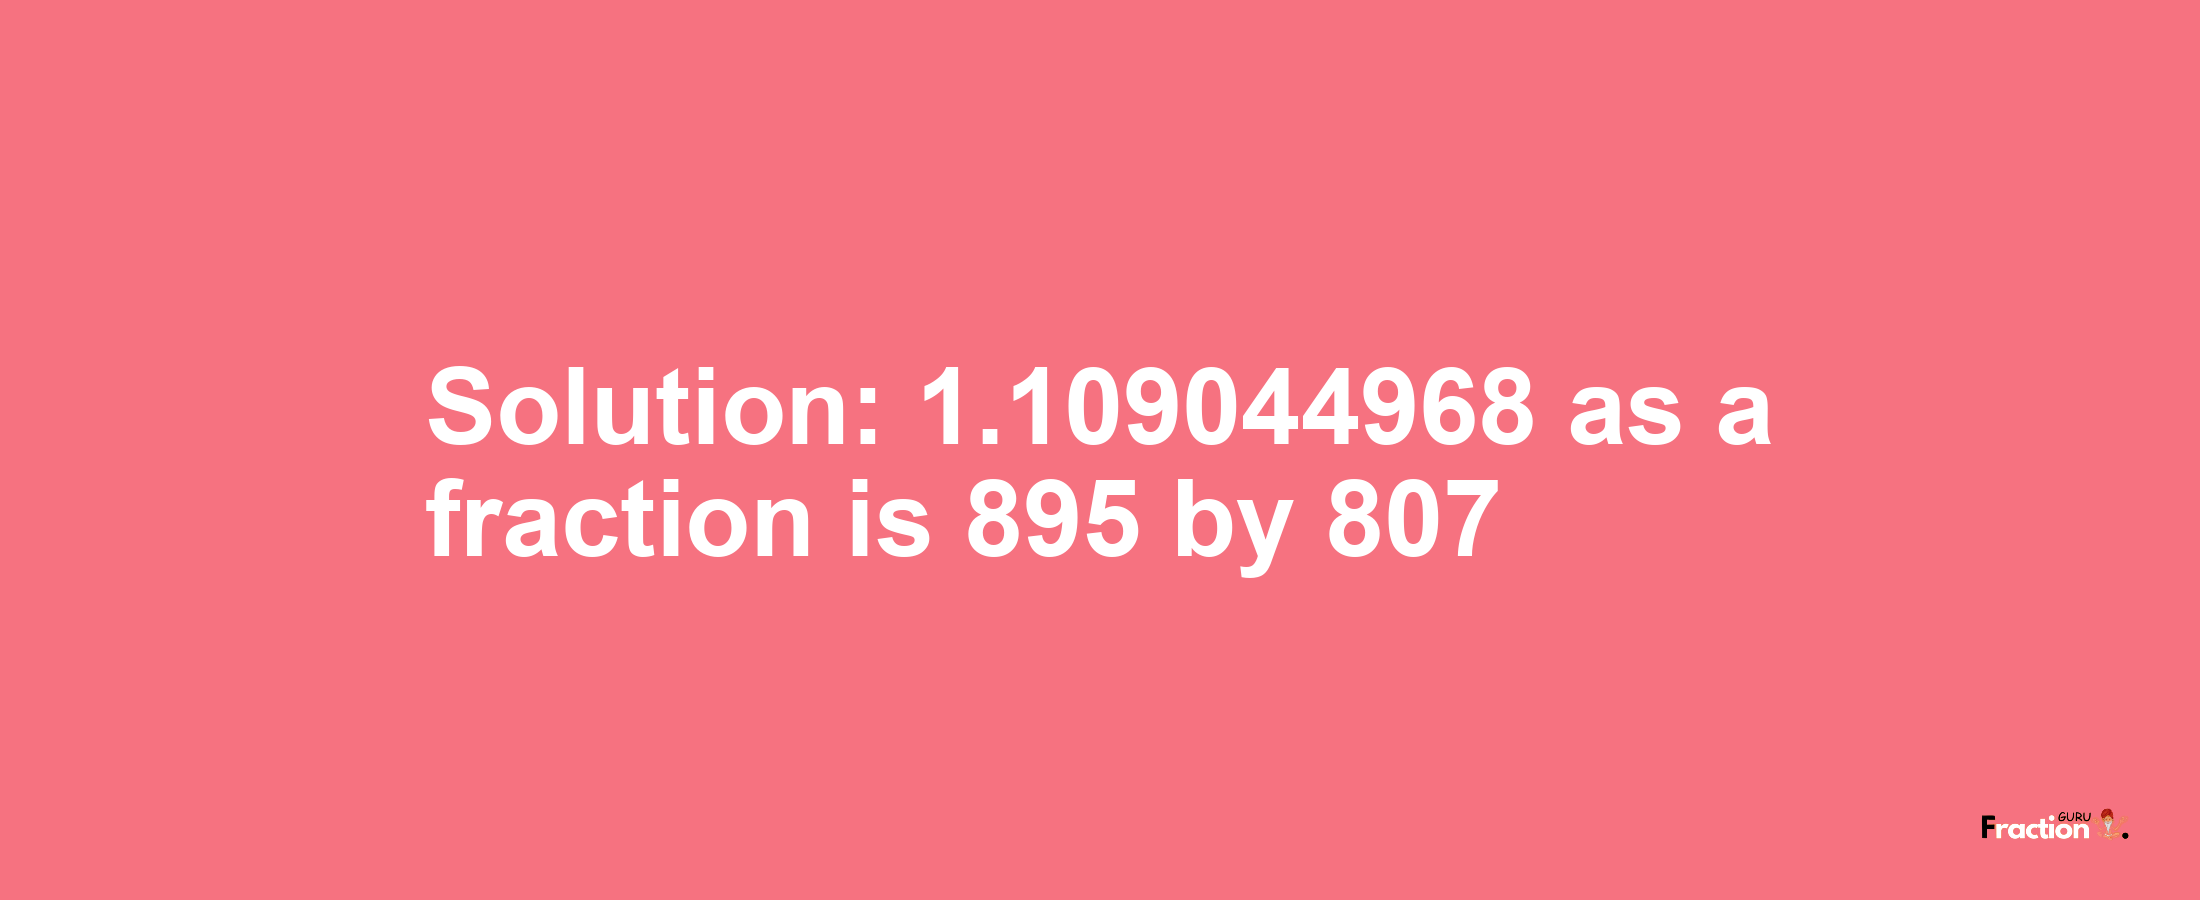 Solution:1.109044968 as a fraction is 895/807